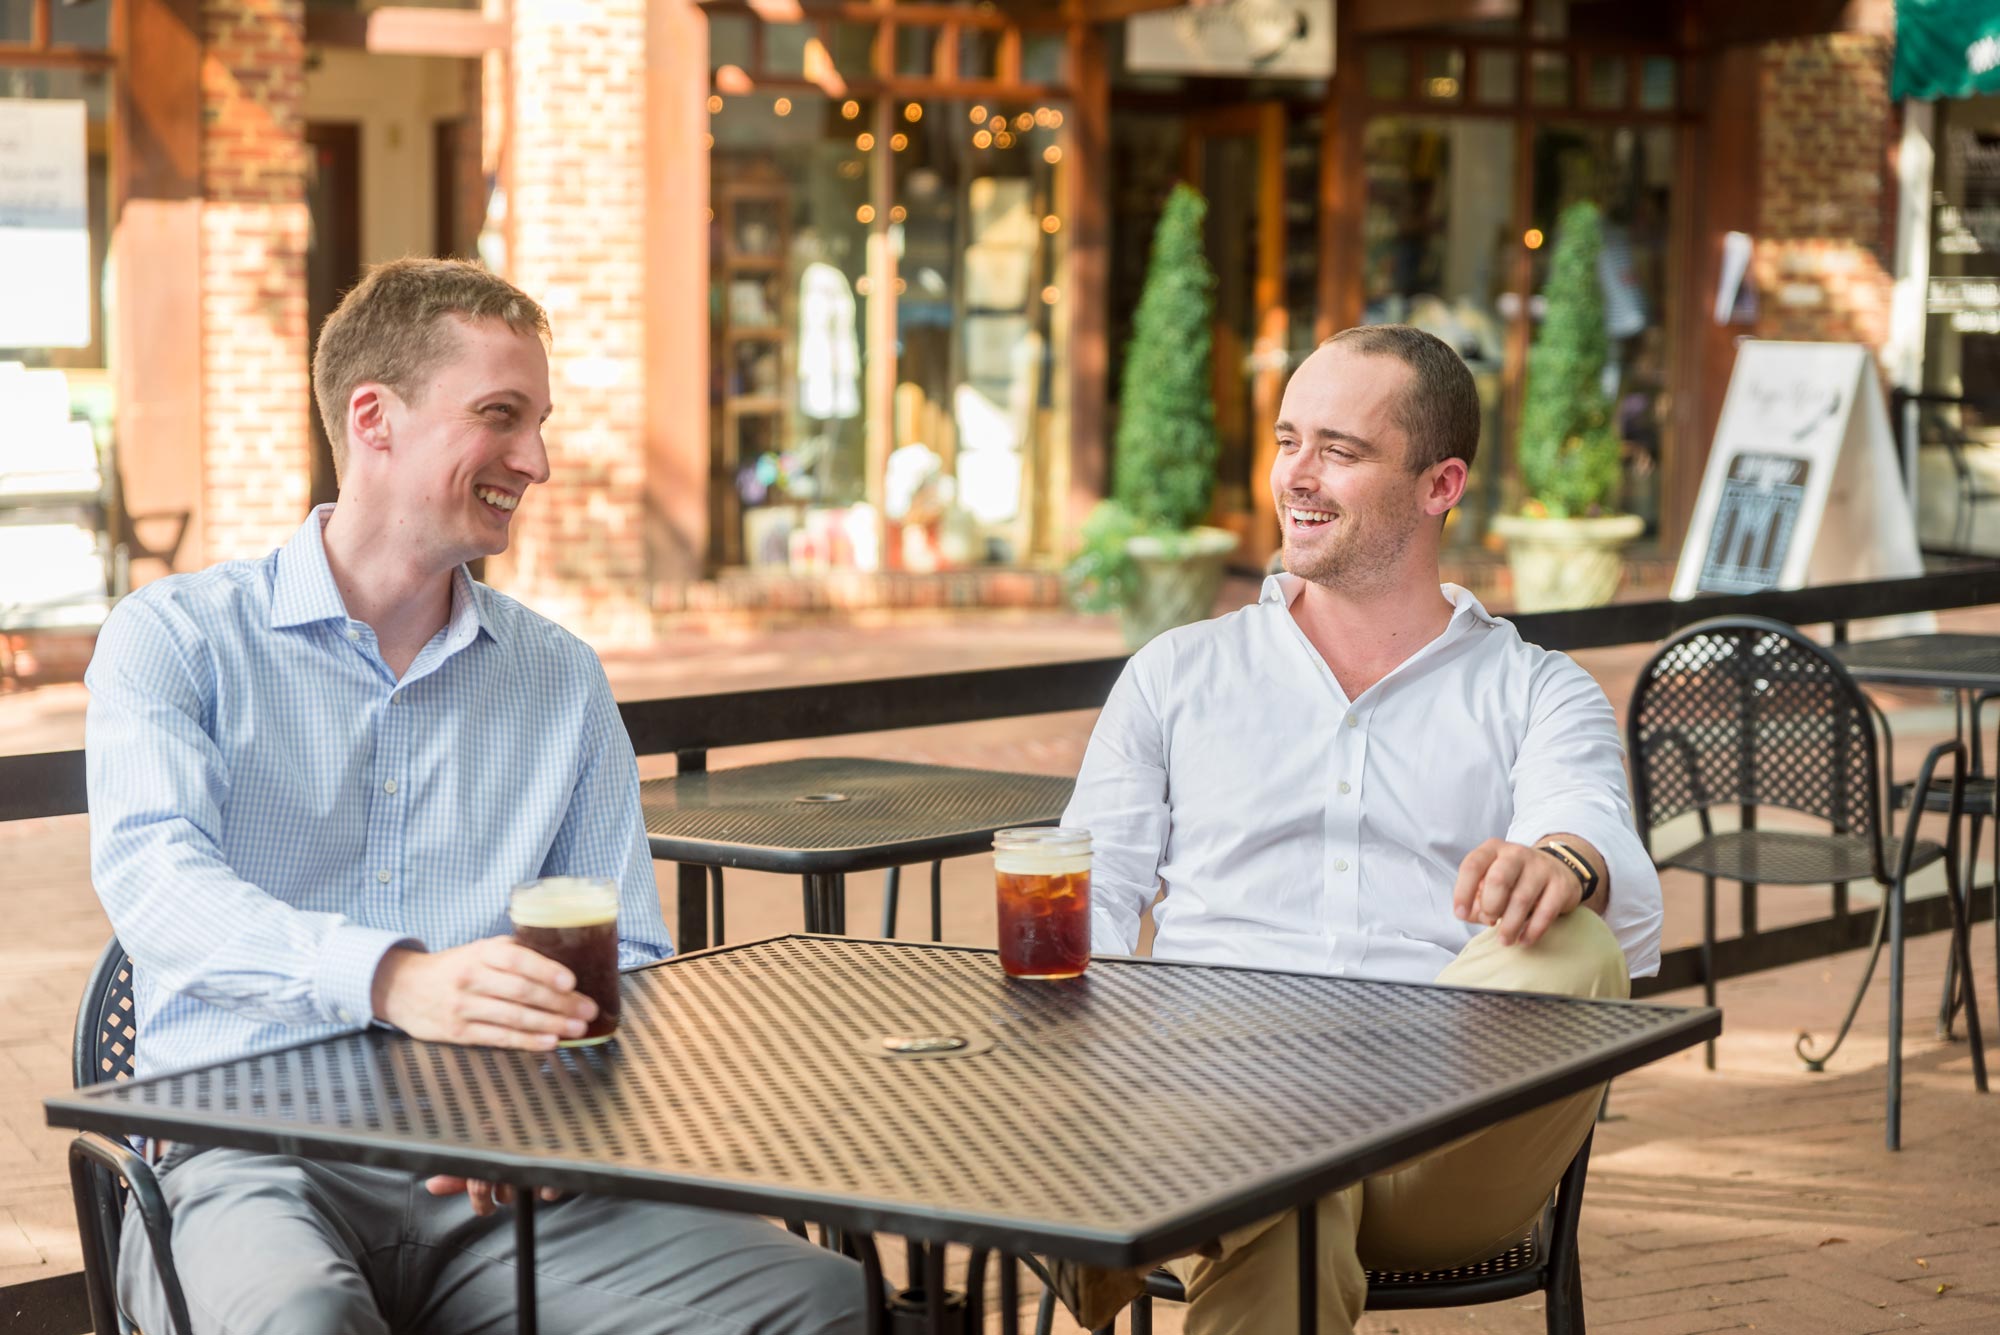 Whit Hunter, right, and Ben Yobp, left, enjoy drinks together at a table on the downtown mall in Charlottesville